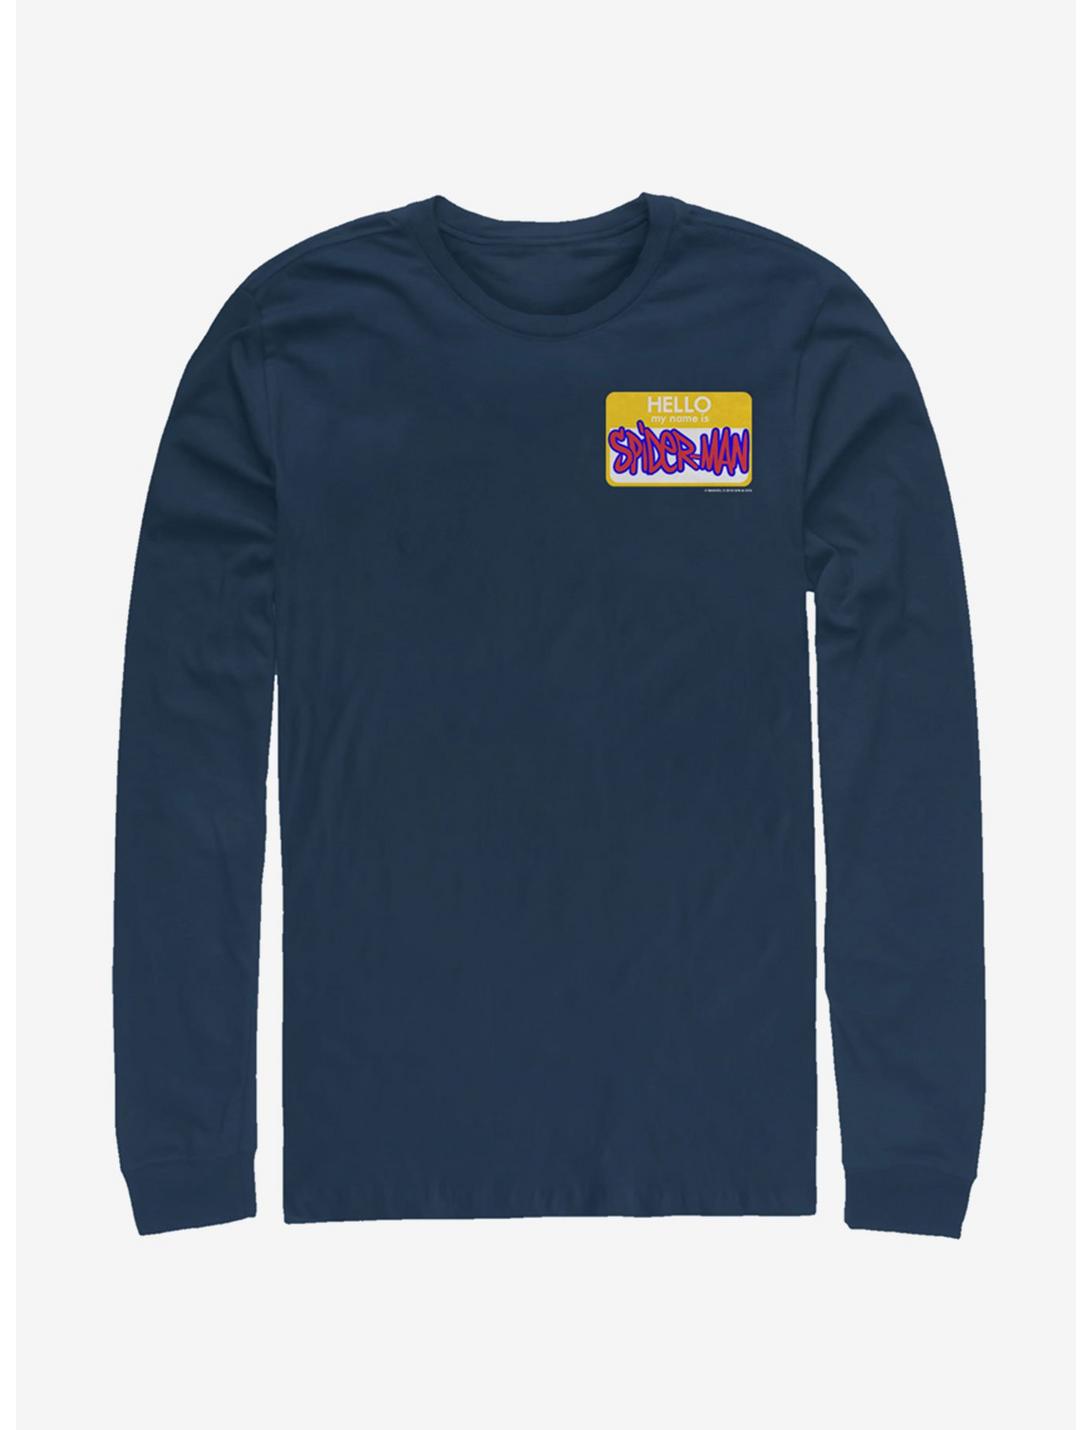 Marvel Spider-Man: Into The Spider-Verse Hello Spider-Man Name Tag Long-Sleeve T-Shirt, NAVY, hi-res